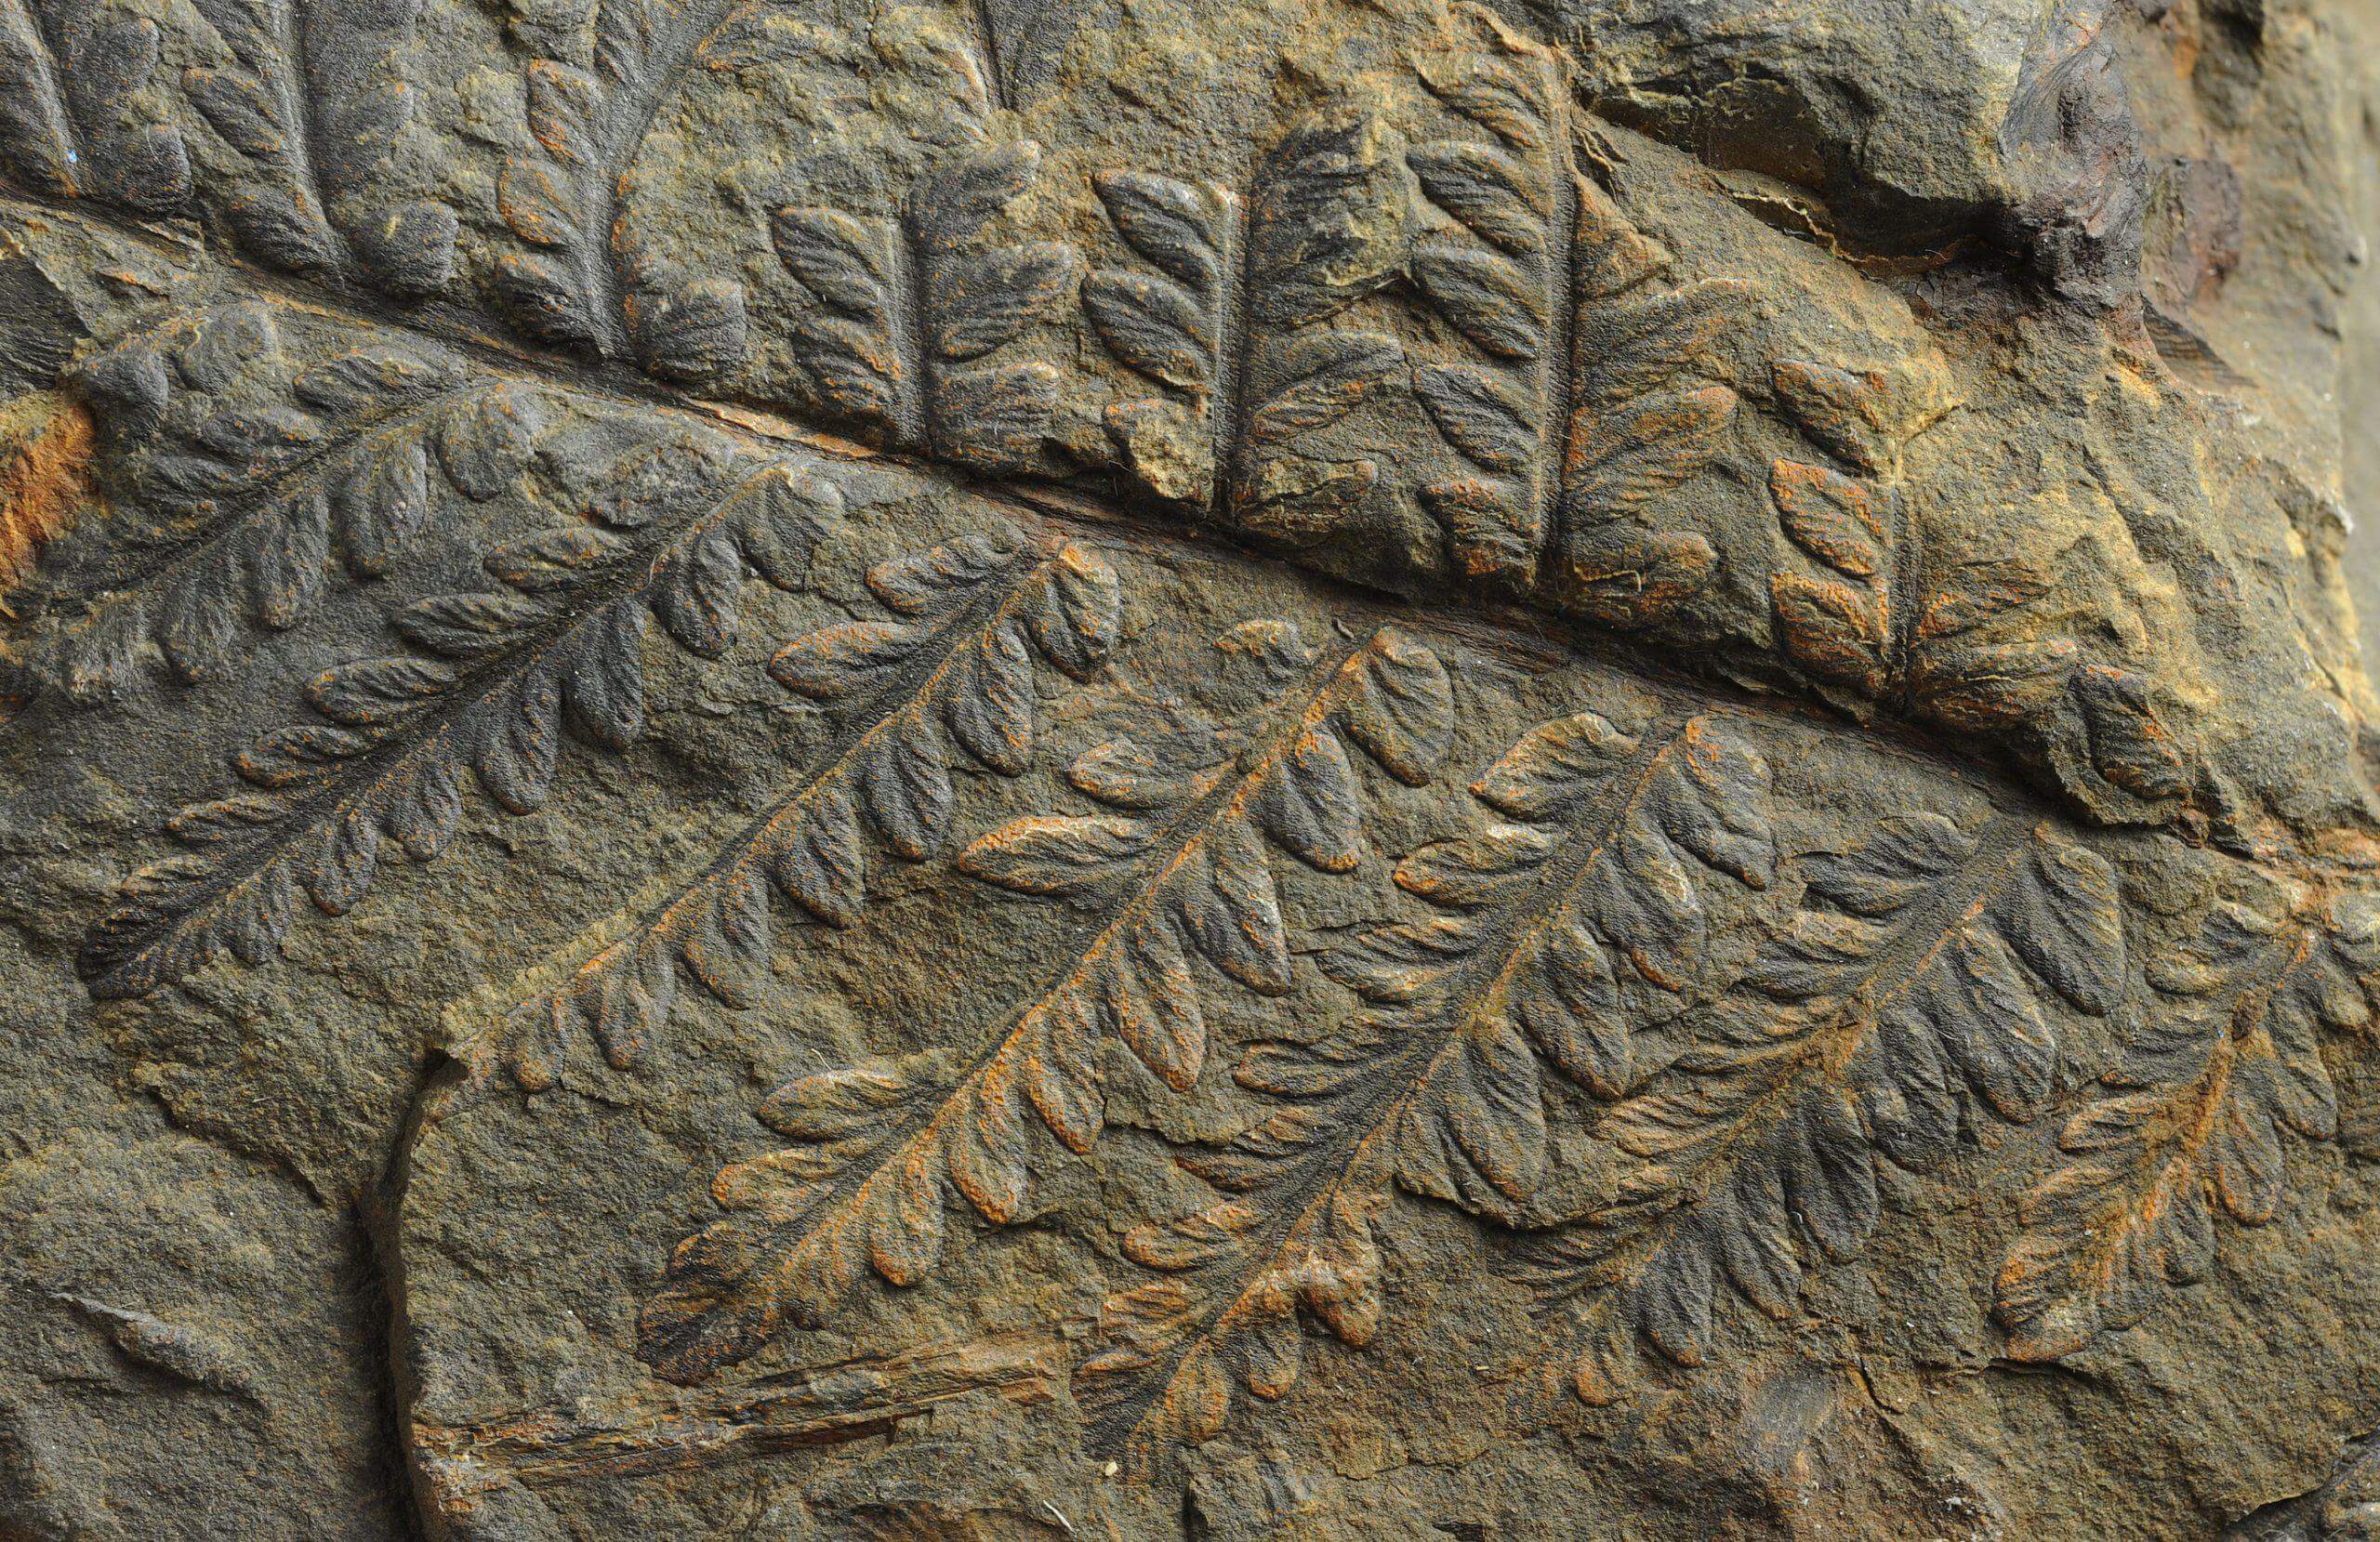 Ferns imprinted within rocks from millions of years ago